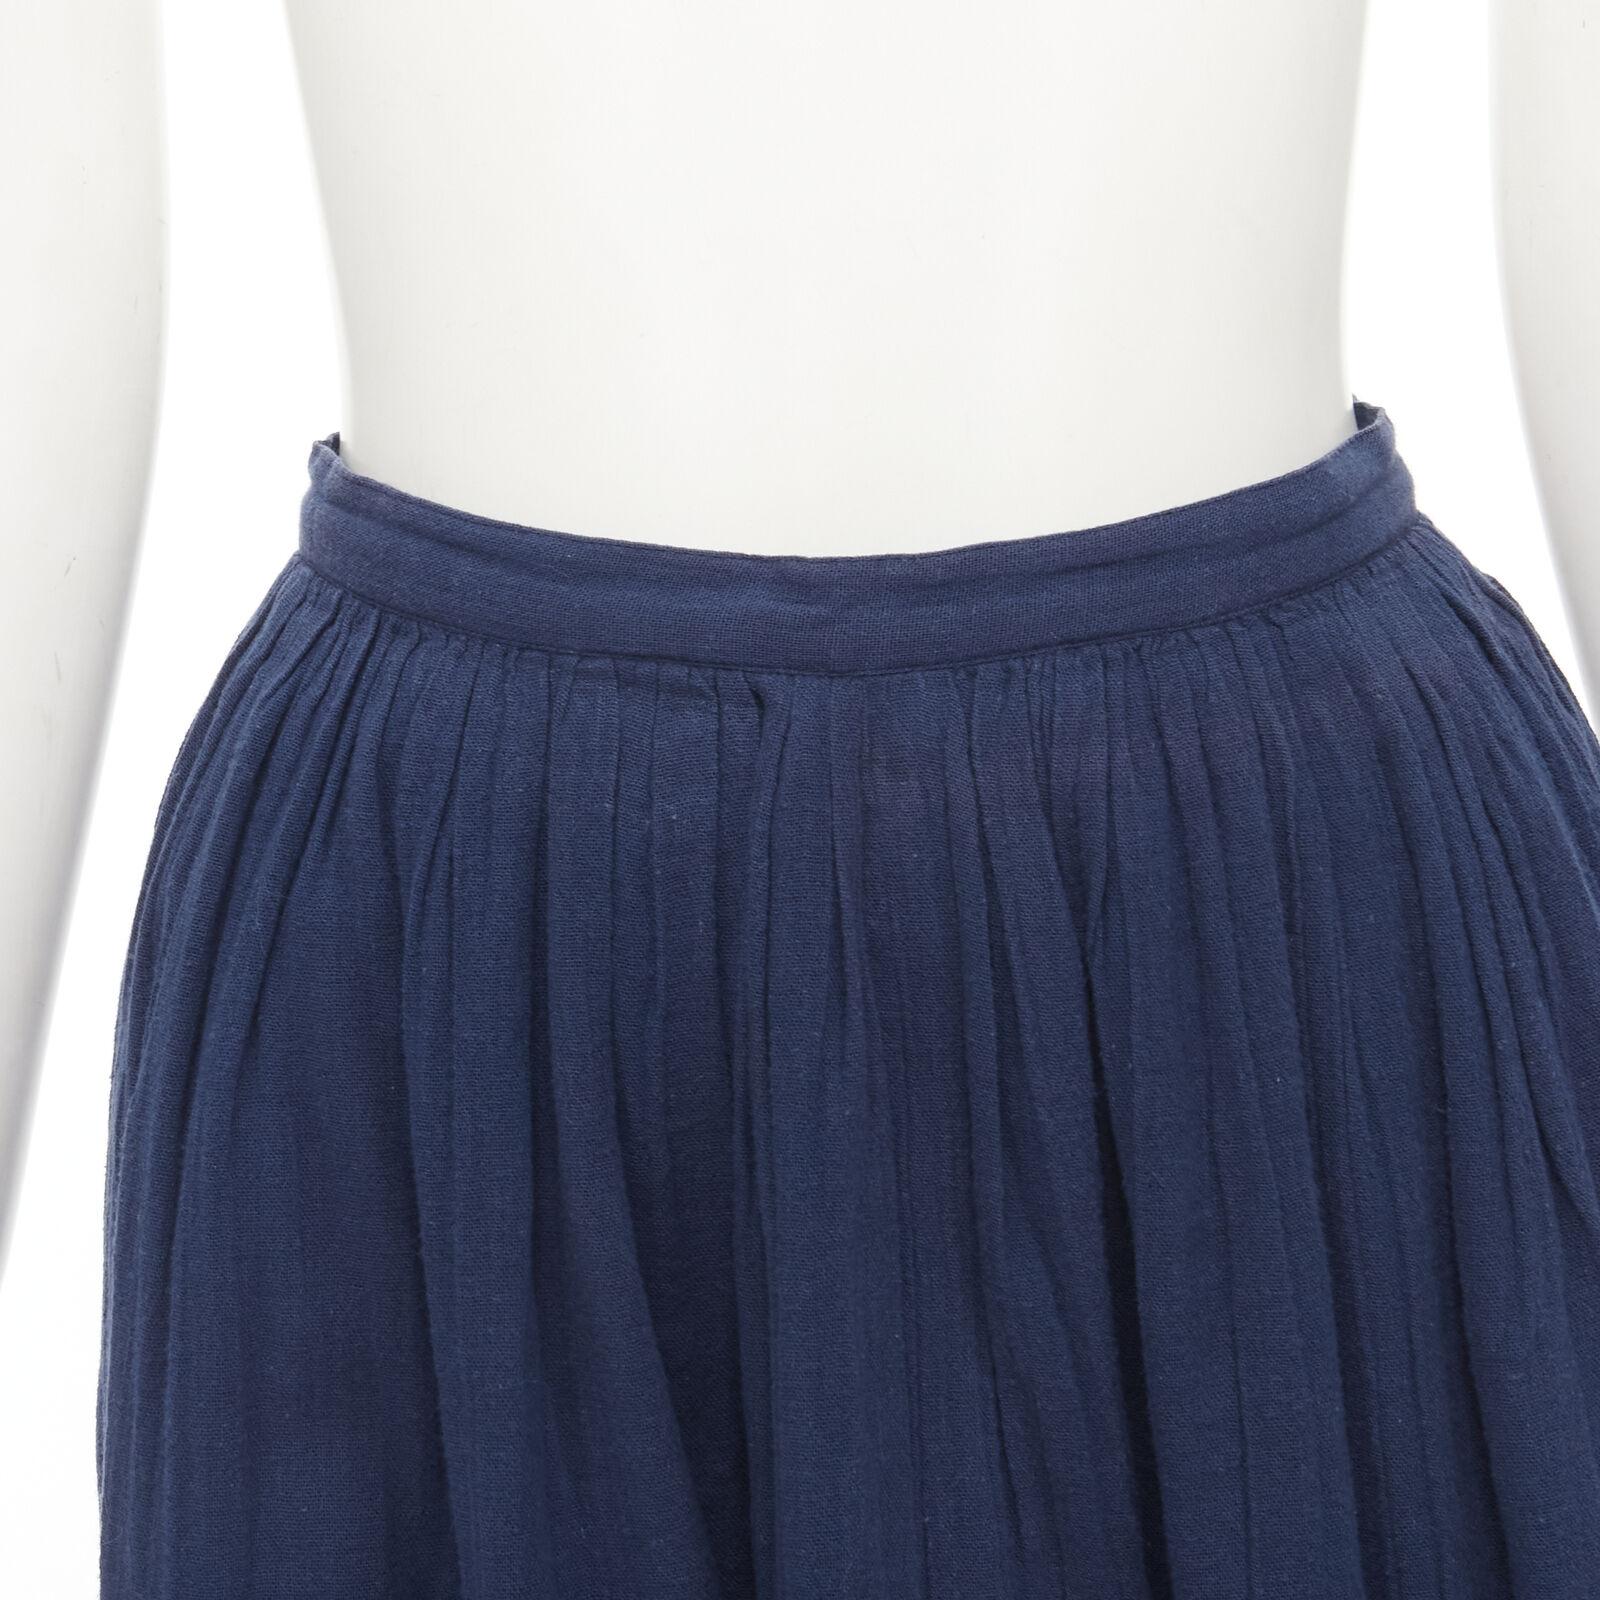 COMME DES GARCONS Vintage 1980's blue crinkled asymmetric waterfall draped skirt For Sale 2